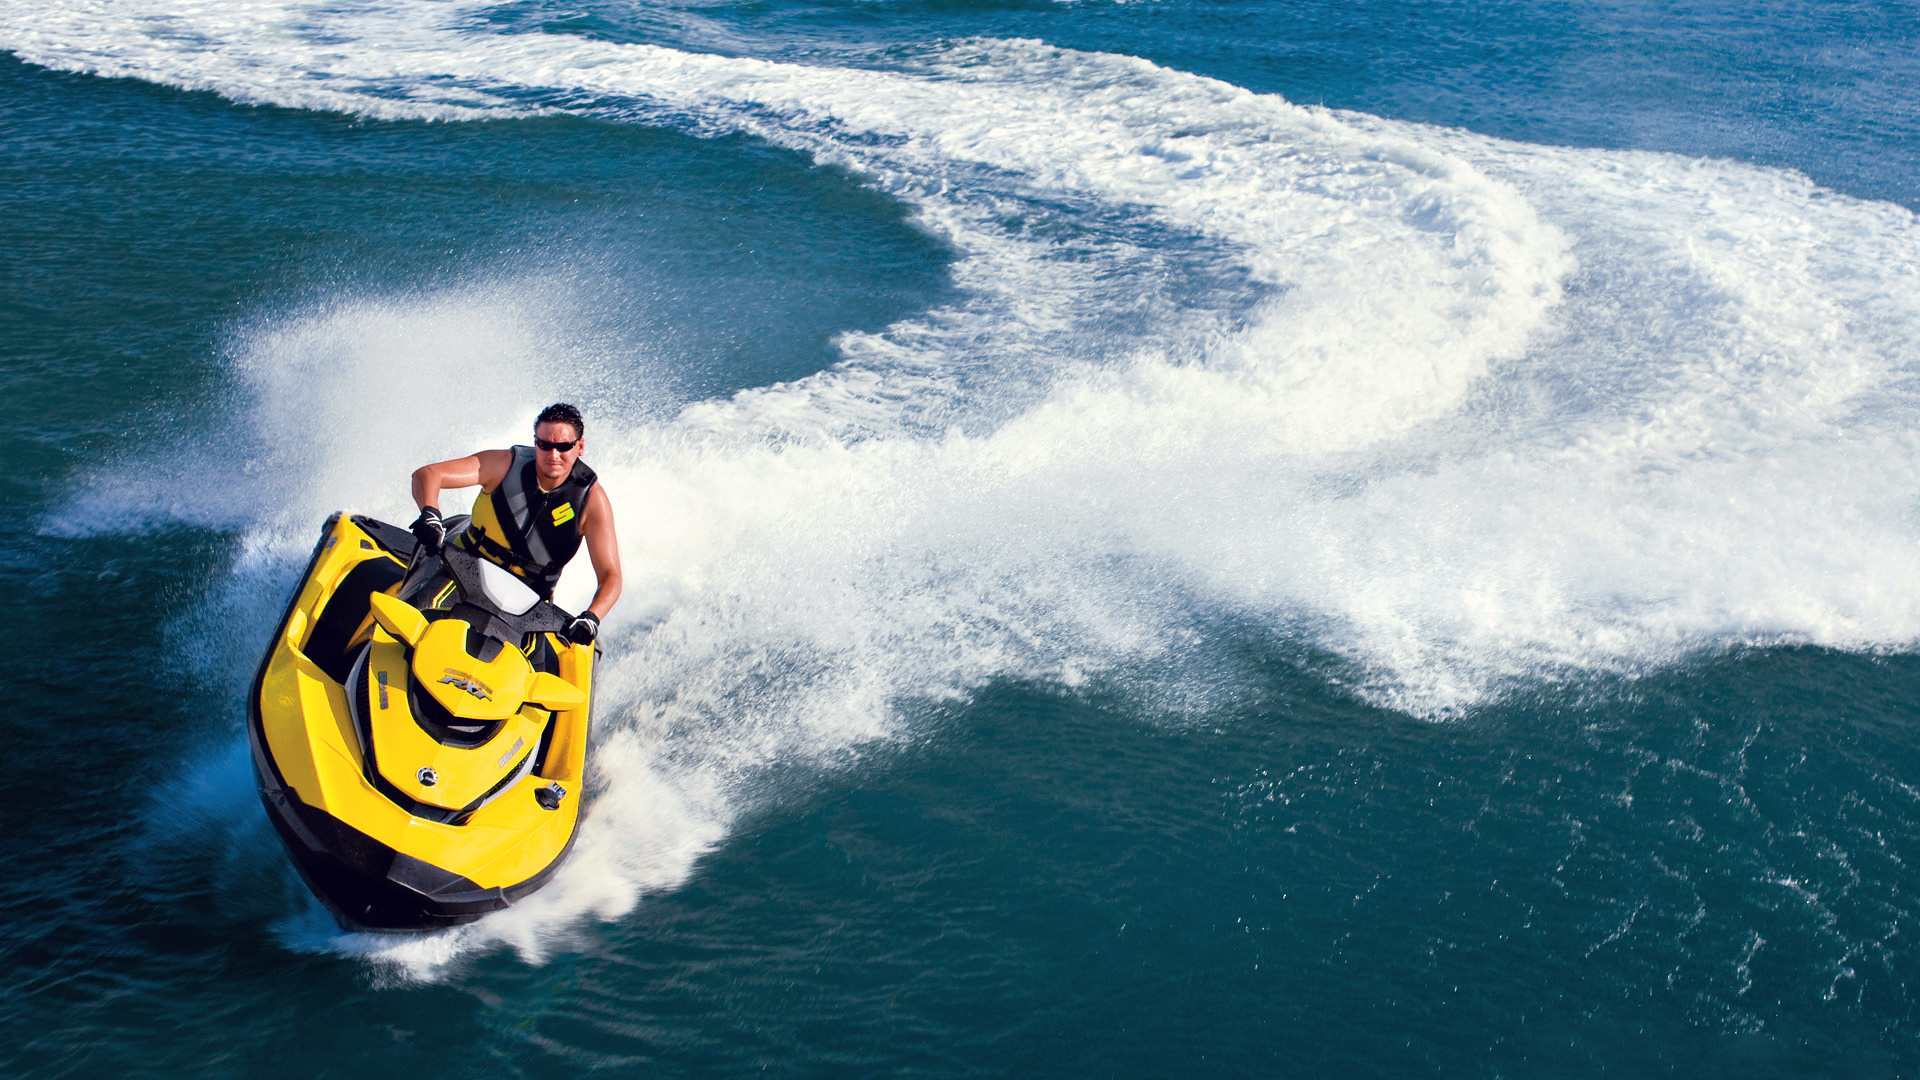 Accelerate the excitement with a jet-ski adventure